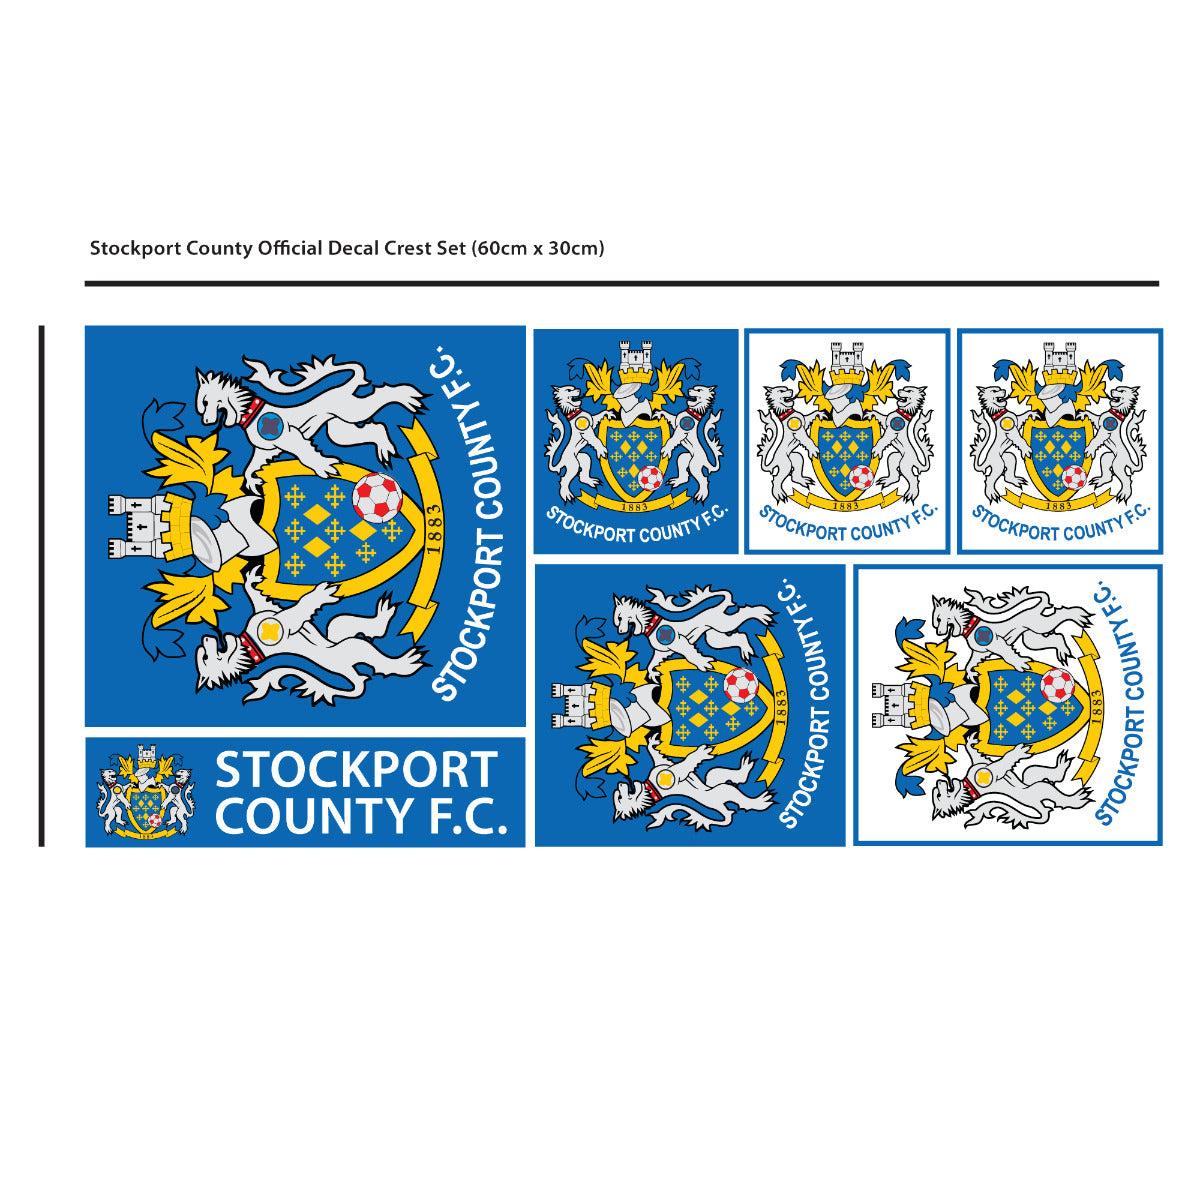 Stockport County F.C. - Bar Scarf + Hatters Wall Sticker Set